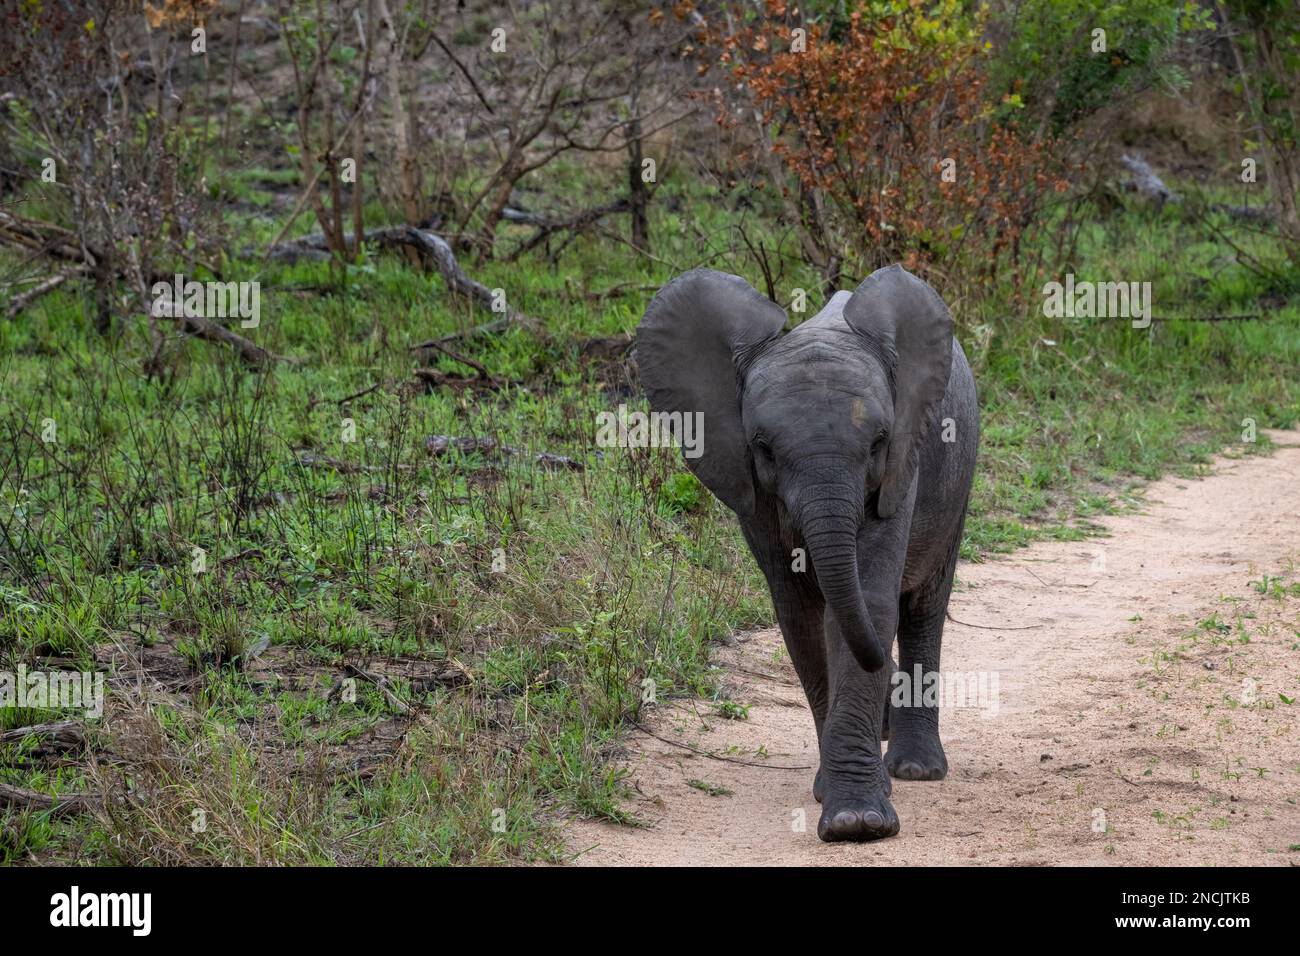 Baby African Elephant walking at the Side of a Dirt Road Stock Photo